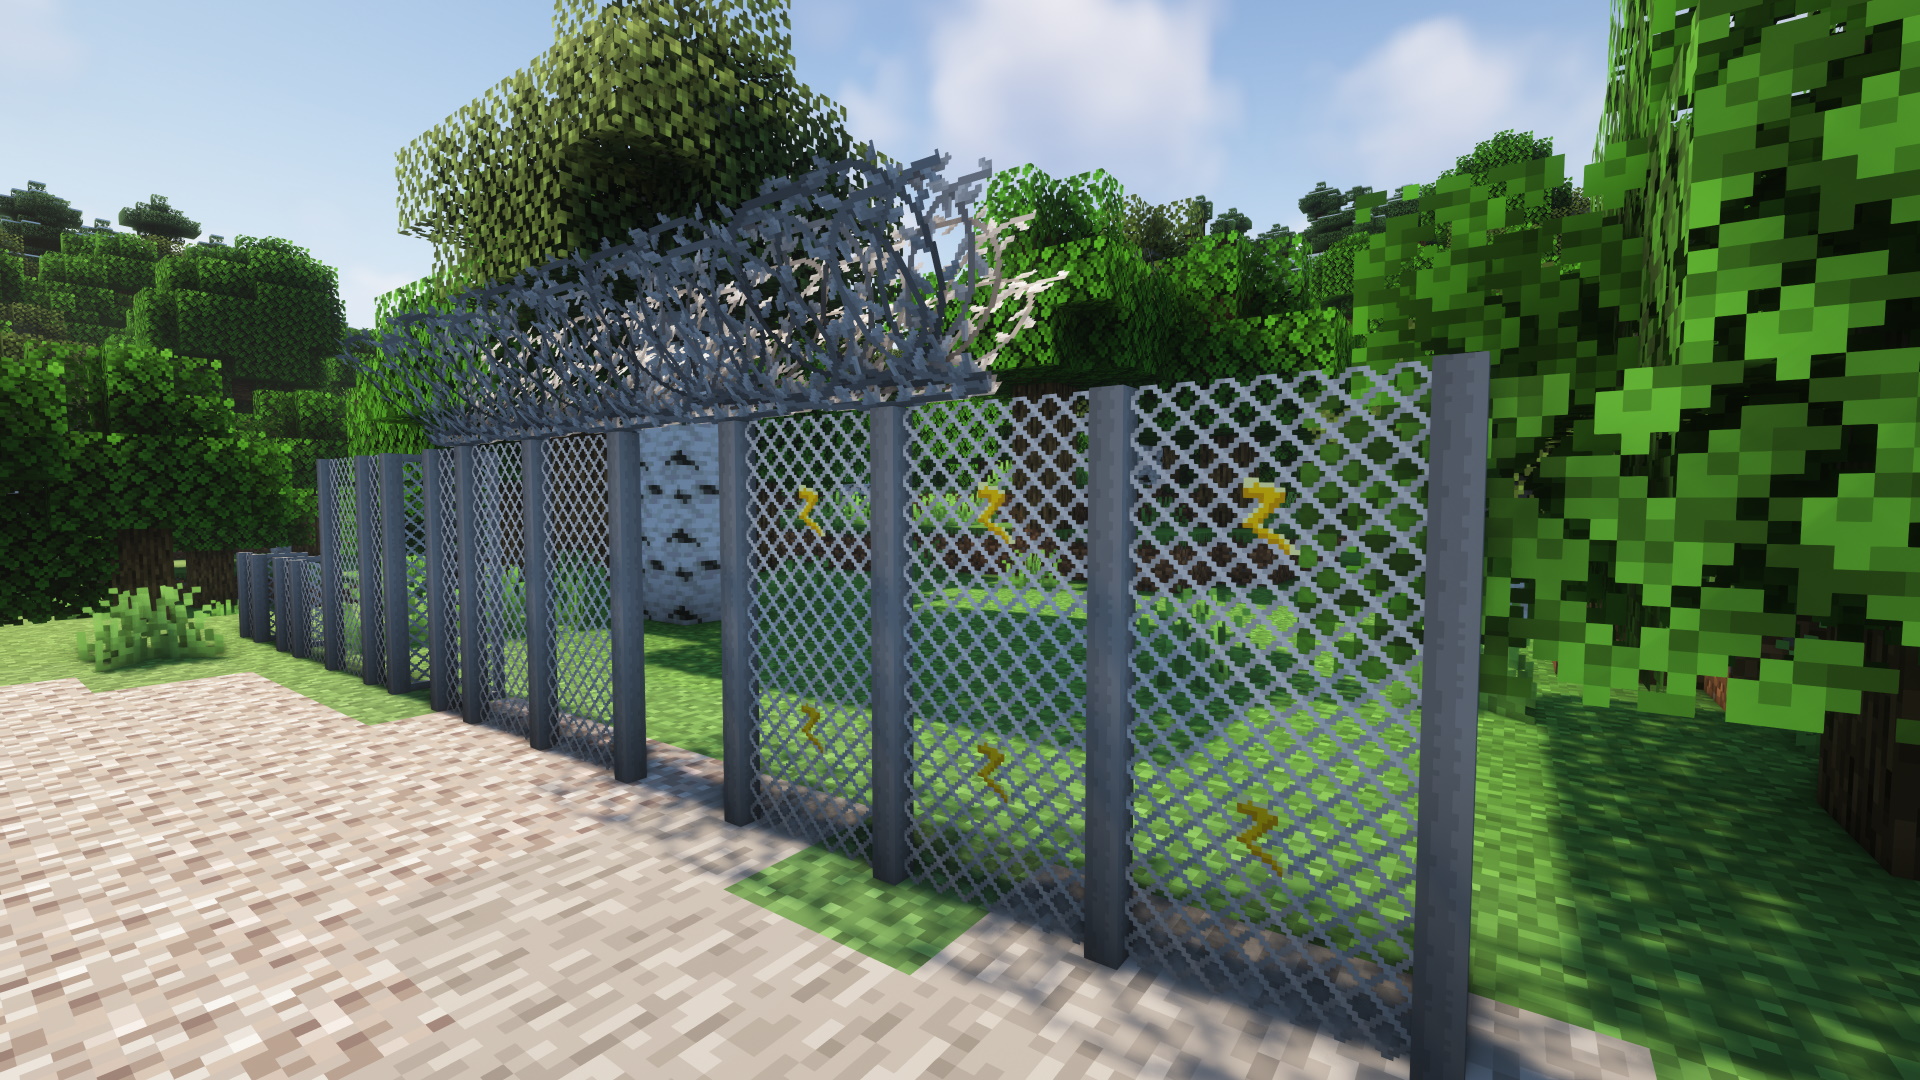 Chain fences, chain gates and barbed wire